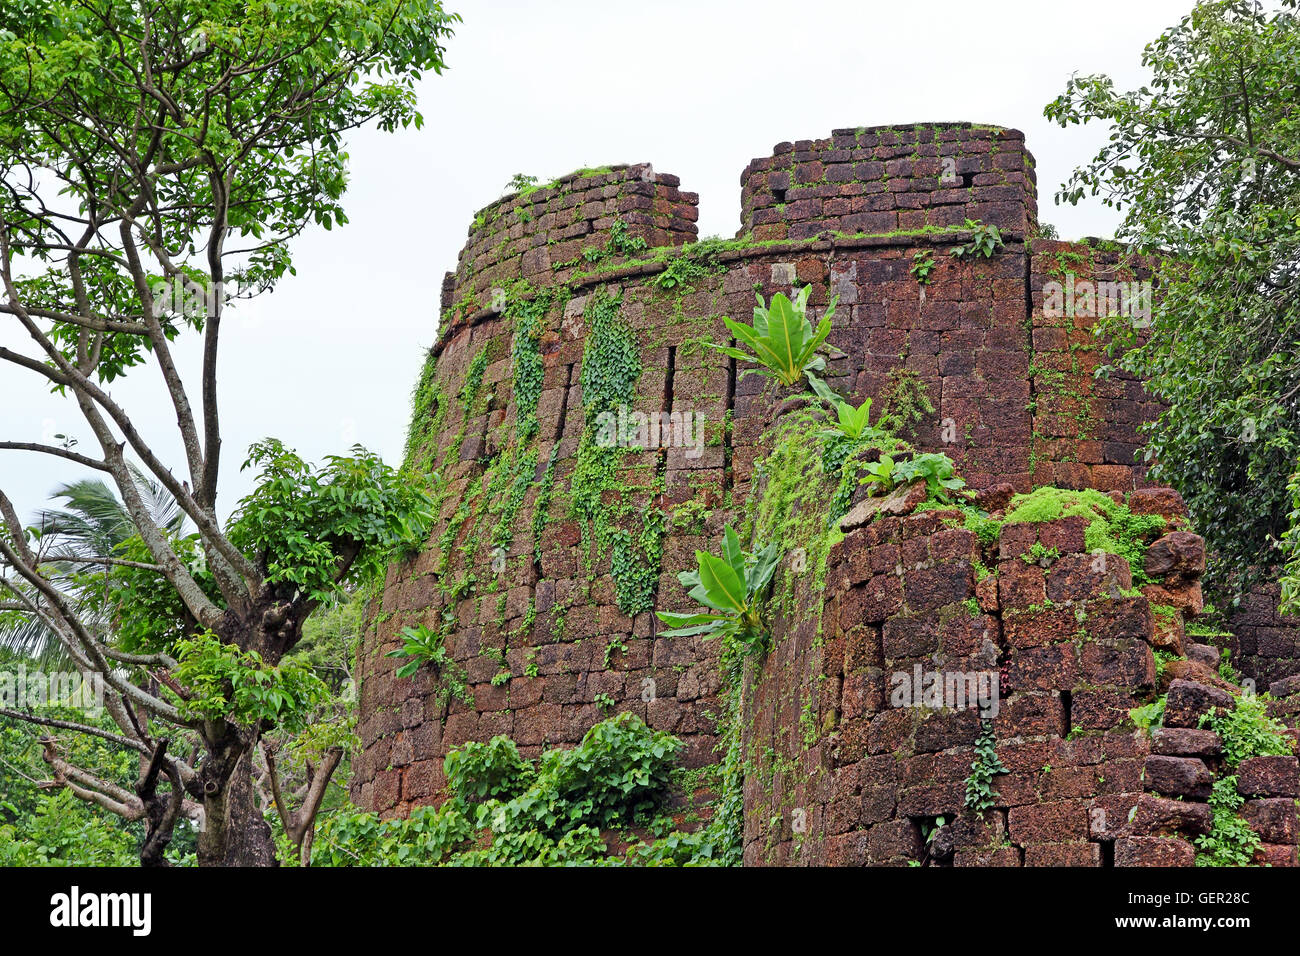 Remains of one of the turrets of Cabo de Rama Fort in Goa, India. A centuries old fort, last owned by the Portuguese. Stock Photo